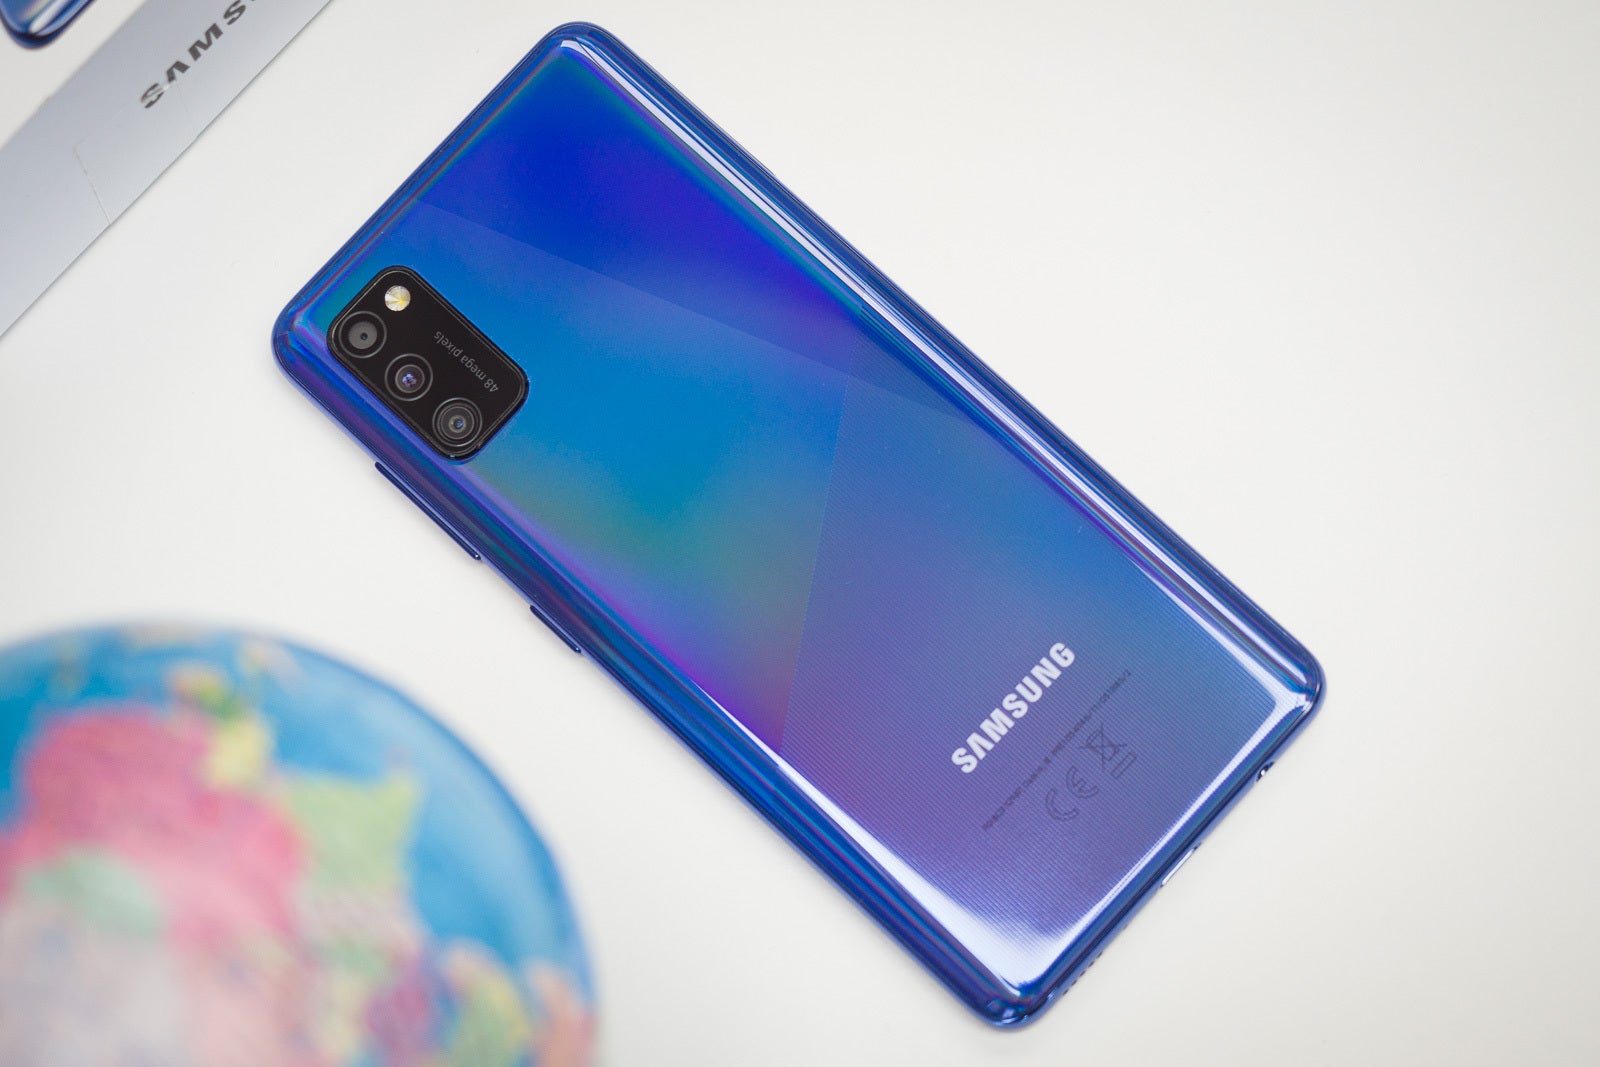  Samsung Galaxy A41 - Huawei&#039;s smartphone shipments dropped almost 60% in Western Europe last quarter